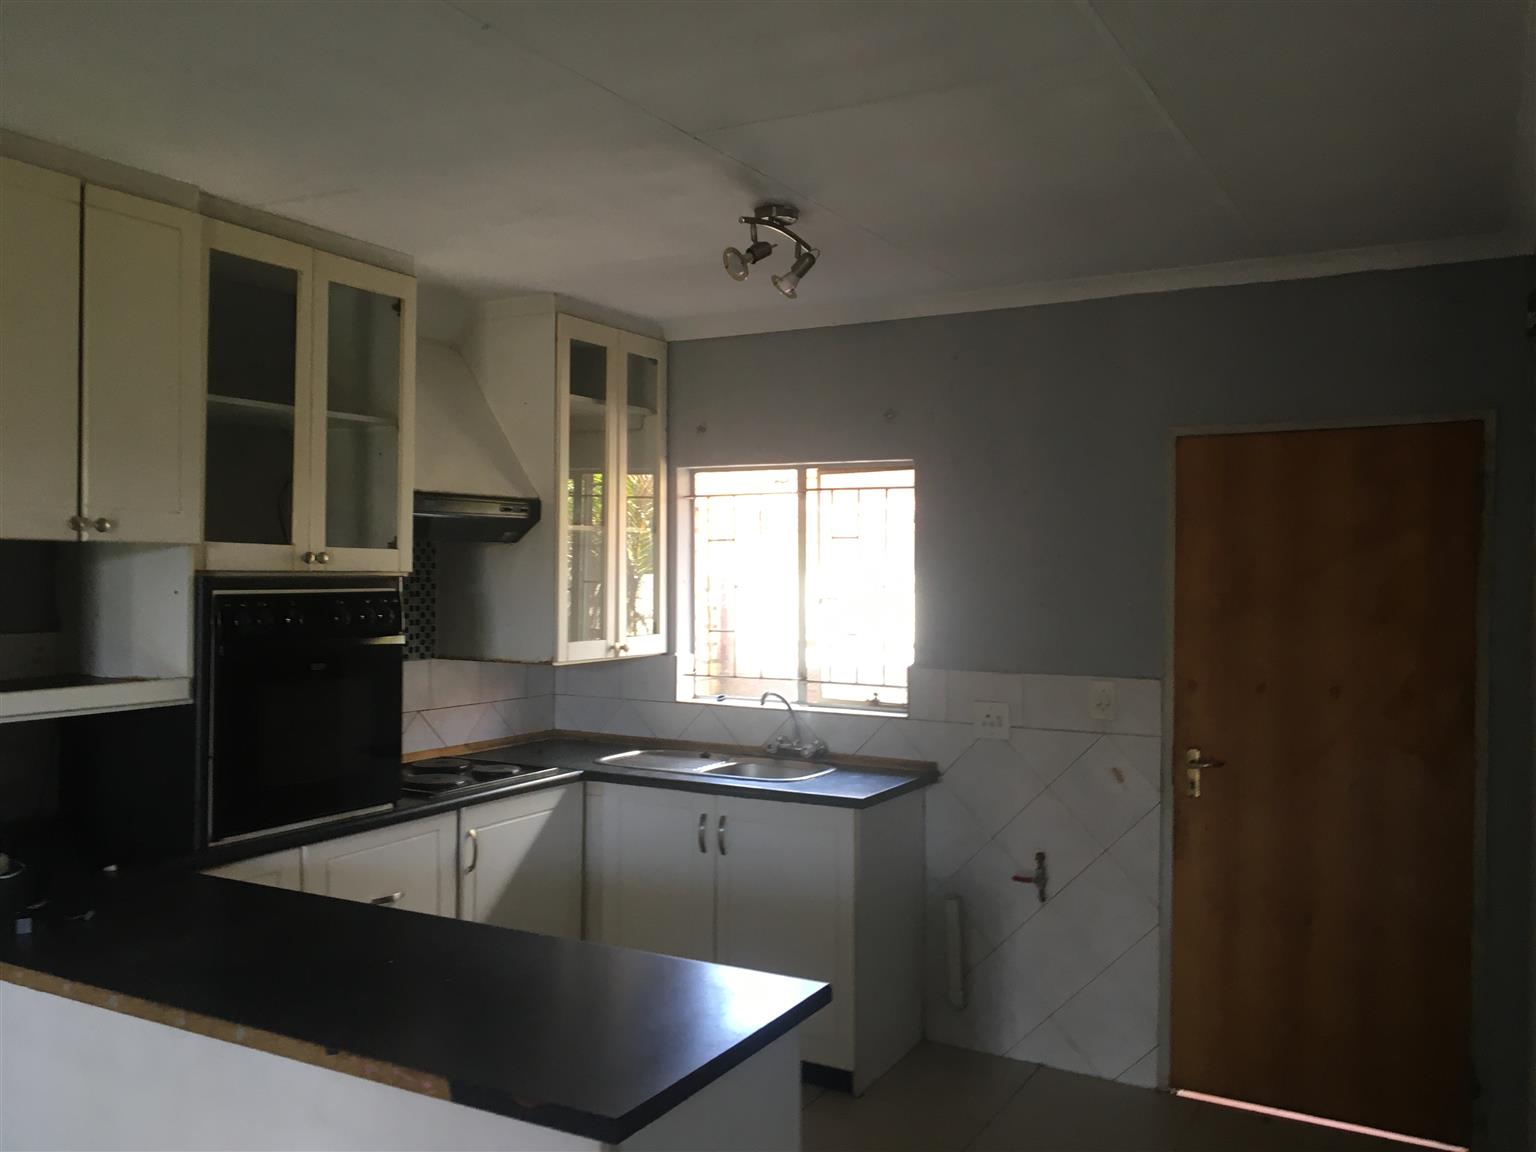 Townhouse in Birchleigh- 2 bedroom, garage, private garden and braai stand.